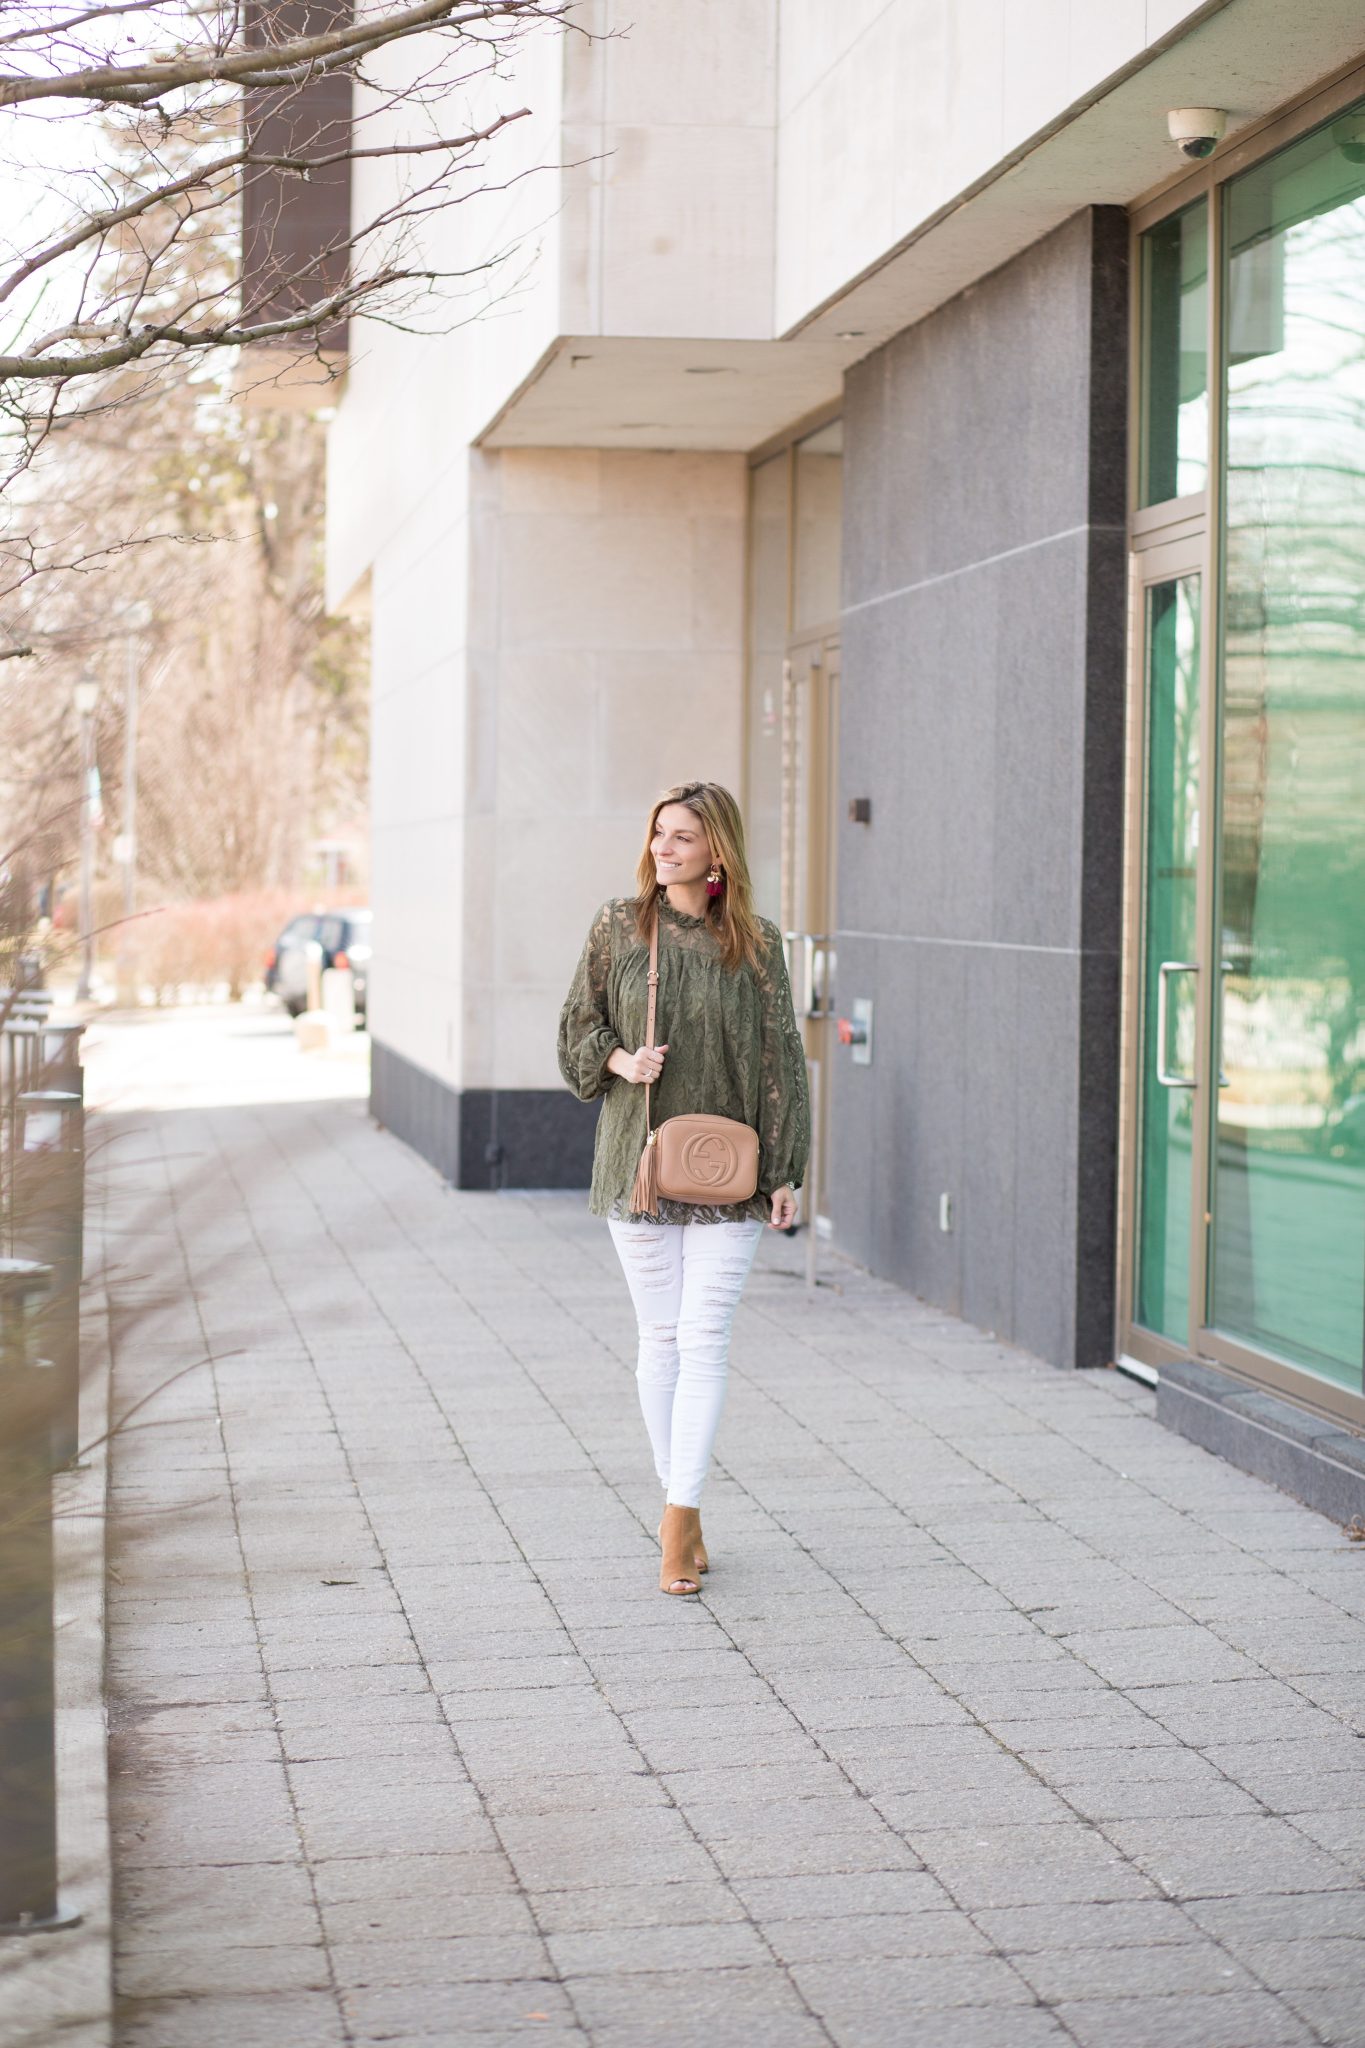 Chicwish Leaf Power Lace Dolly Top in Olive, white jeans from jean machine, nude peep toe booties from Le Chateau, Gucci nude soho disco bag, tassel earrings from H&M